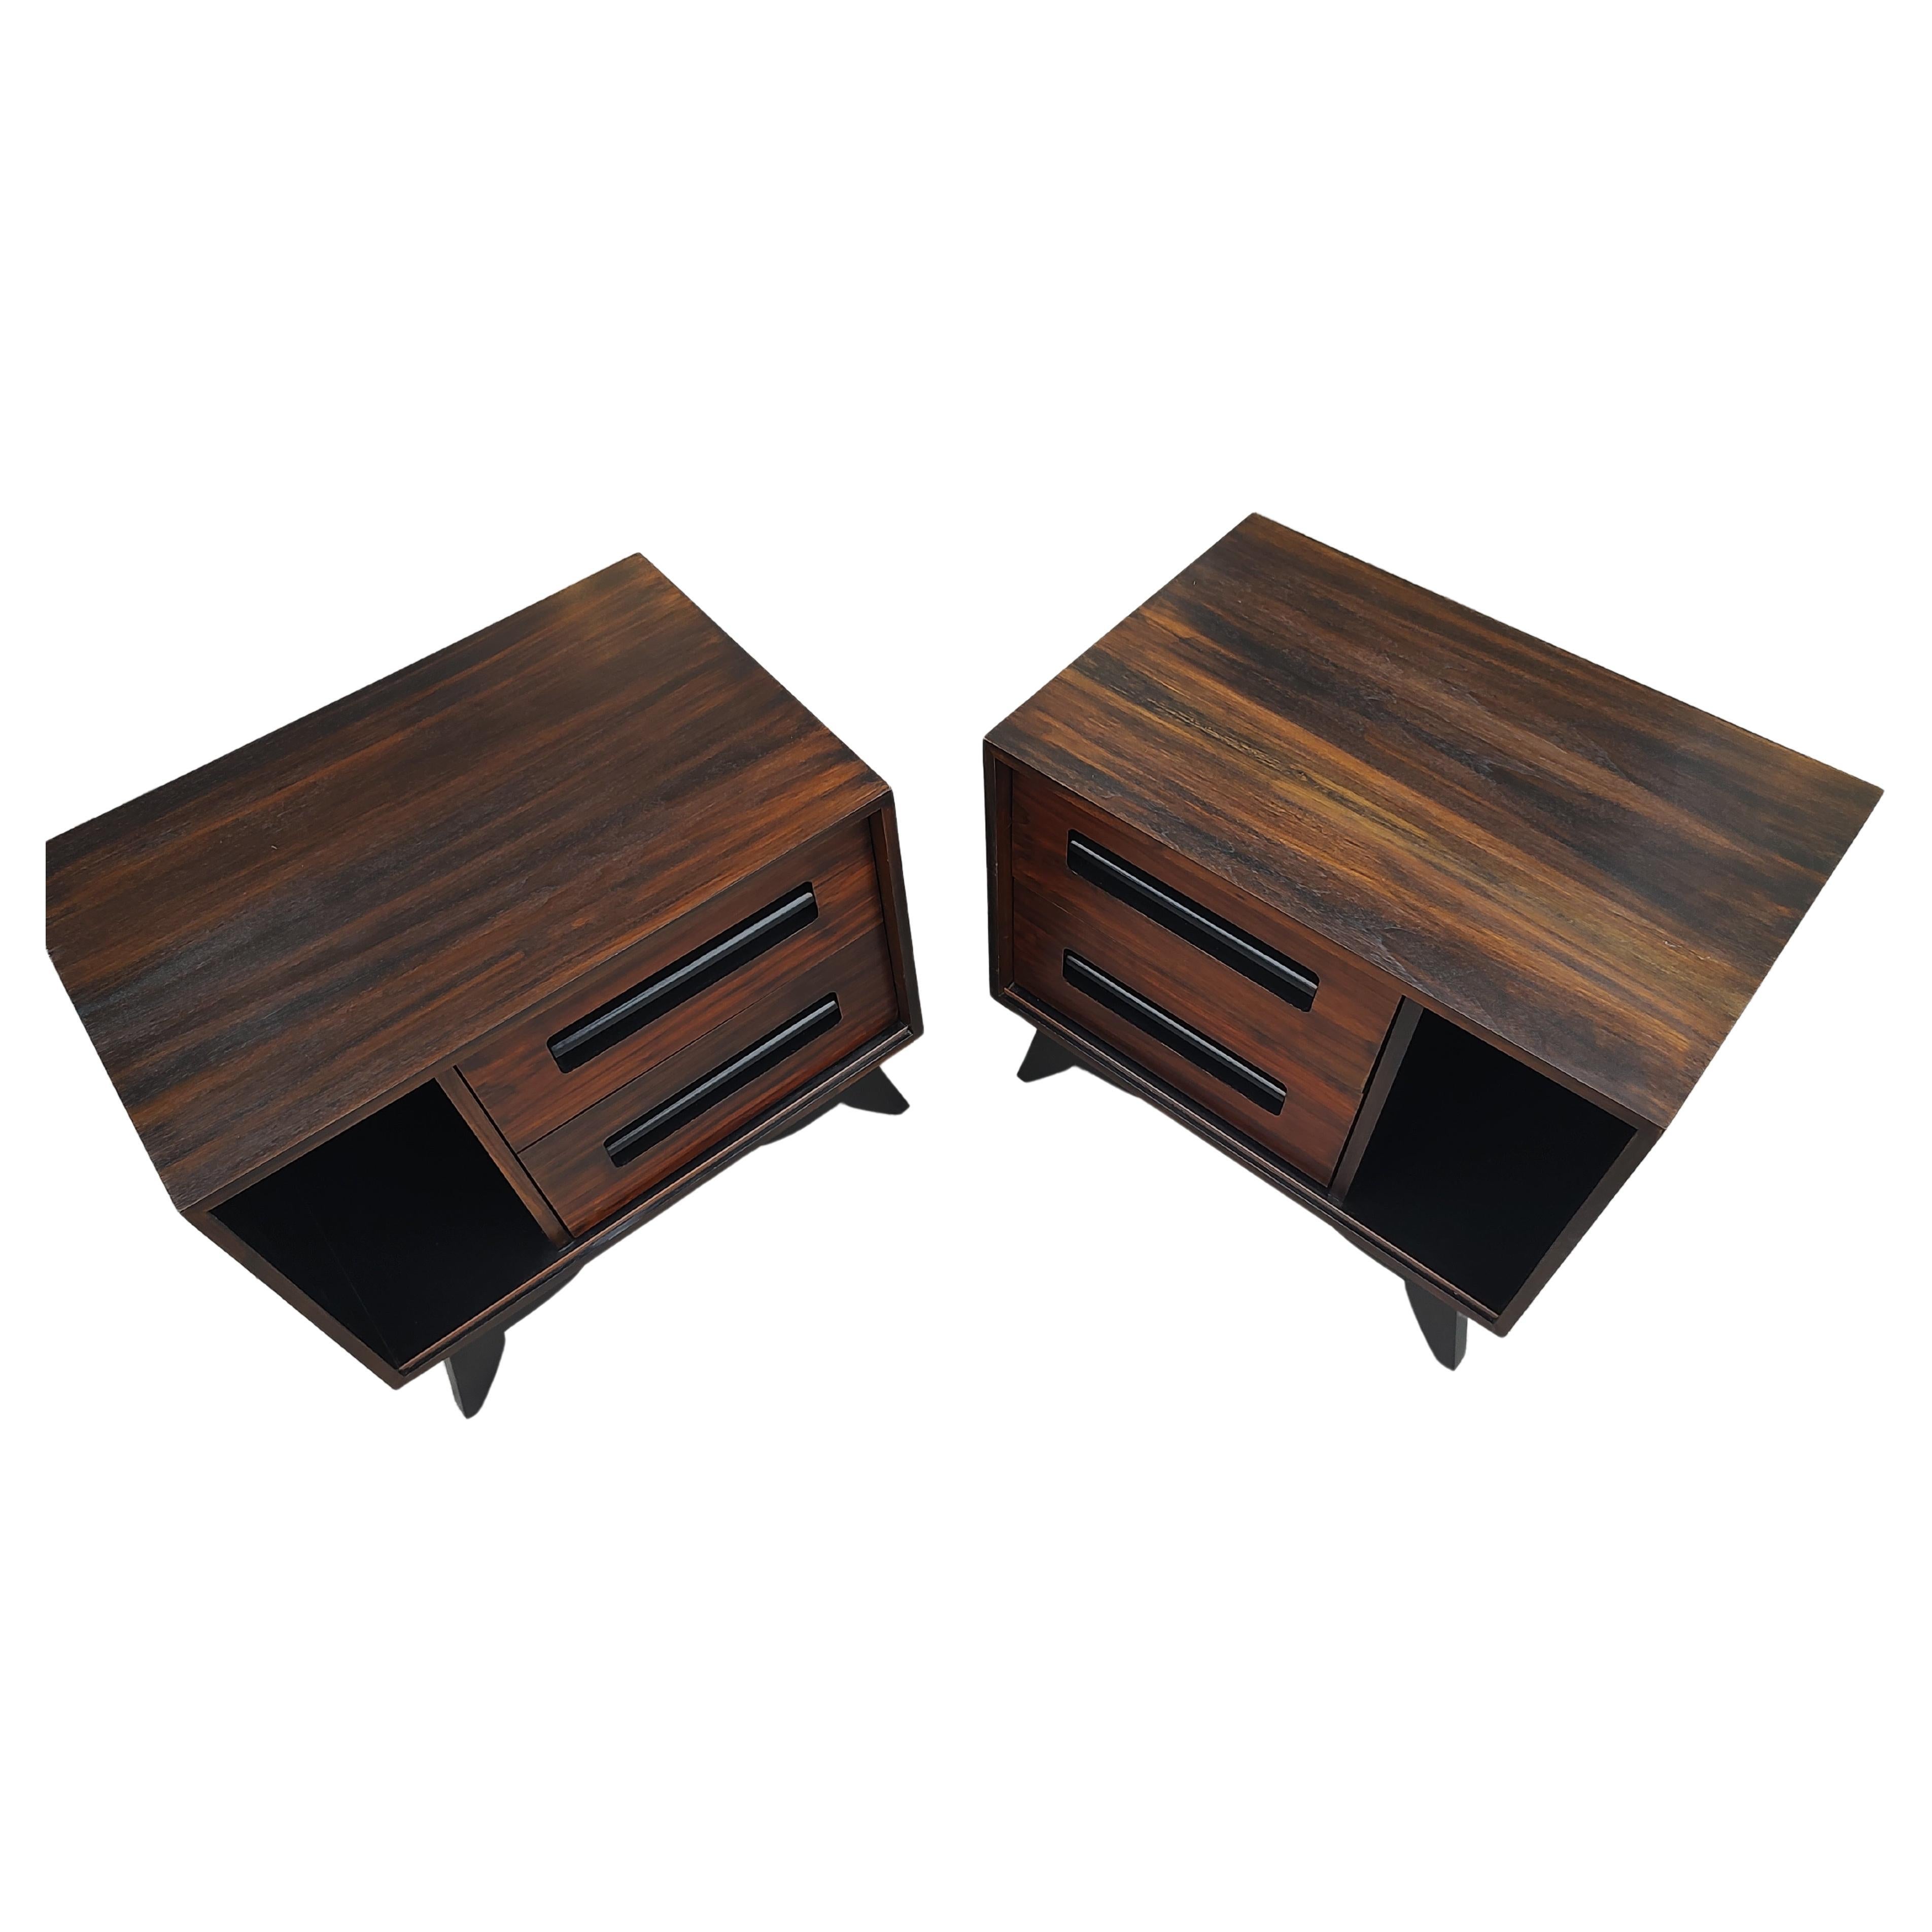 Pair of Mid-Century Modern Danish Rosewood & Black Lacquer Nightstands C1970 In Good Condition For Sale In Port Jervis, NY